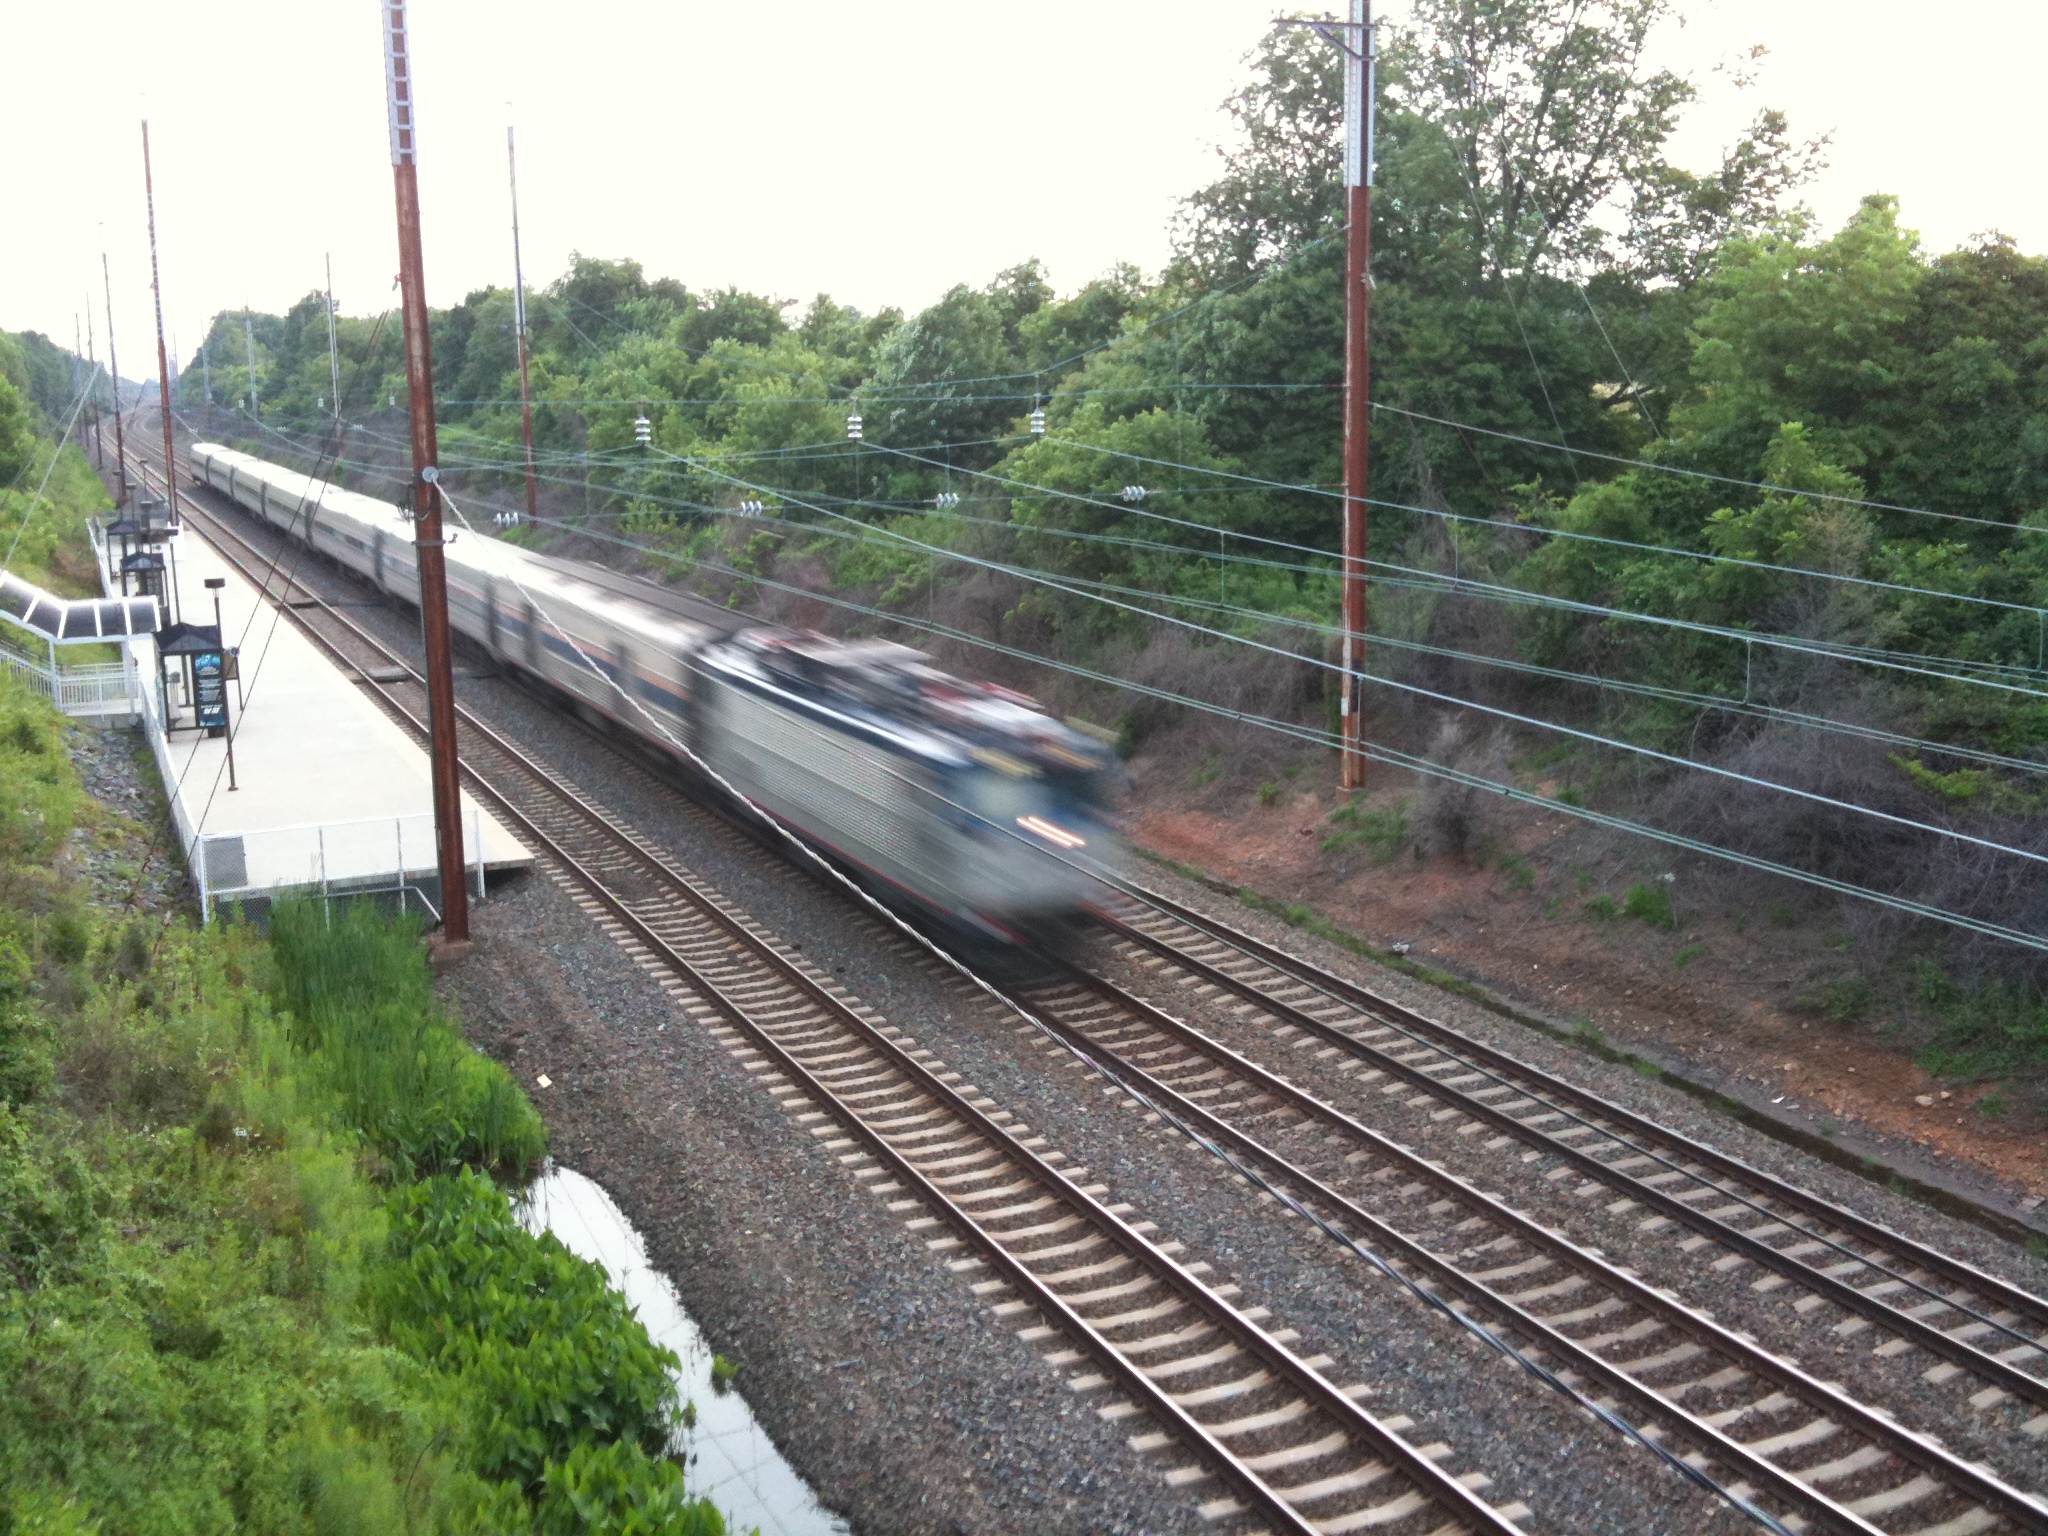 a train traveling along the tracks in an urban area